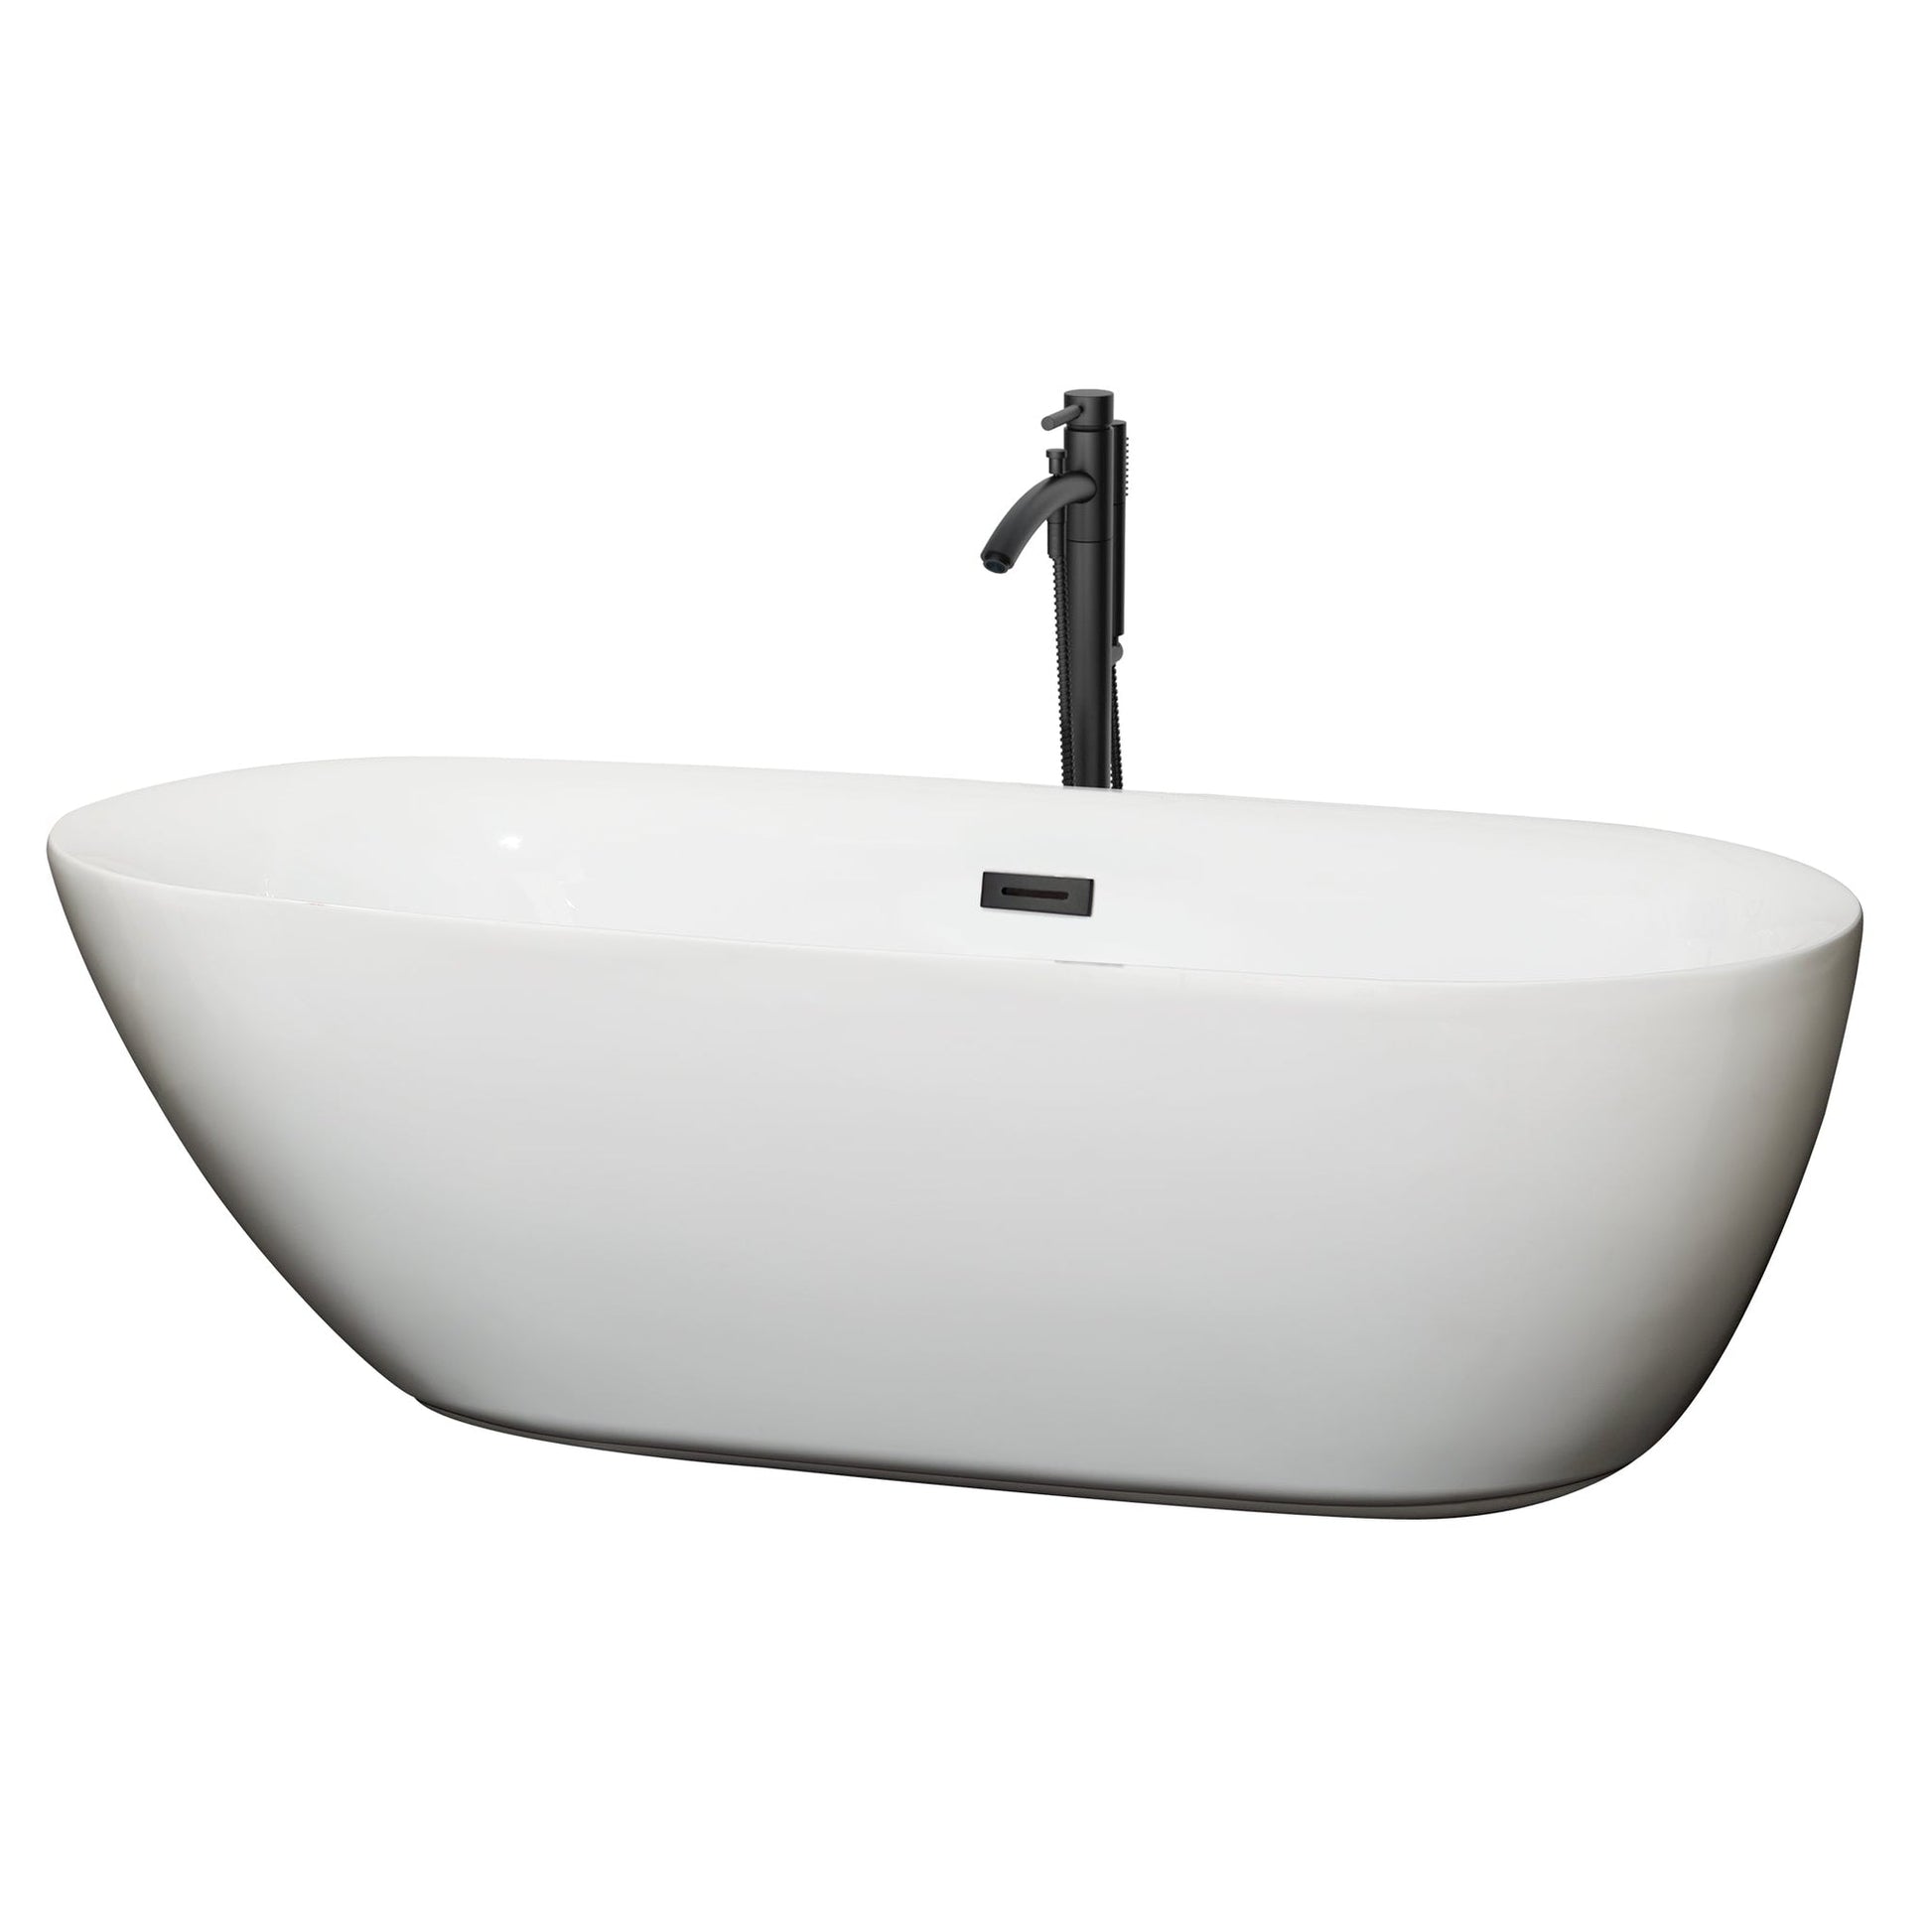 Wyndham Collection Melissa 71" Freestanding Bathtub in White With Floor Mounted Faucet, Drain and Overflow Trim in Matte Black